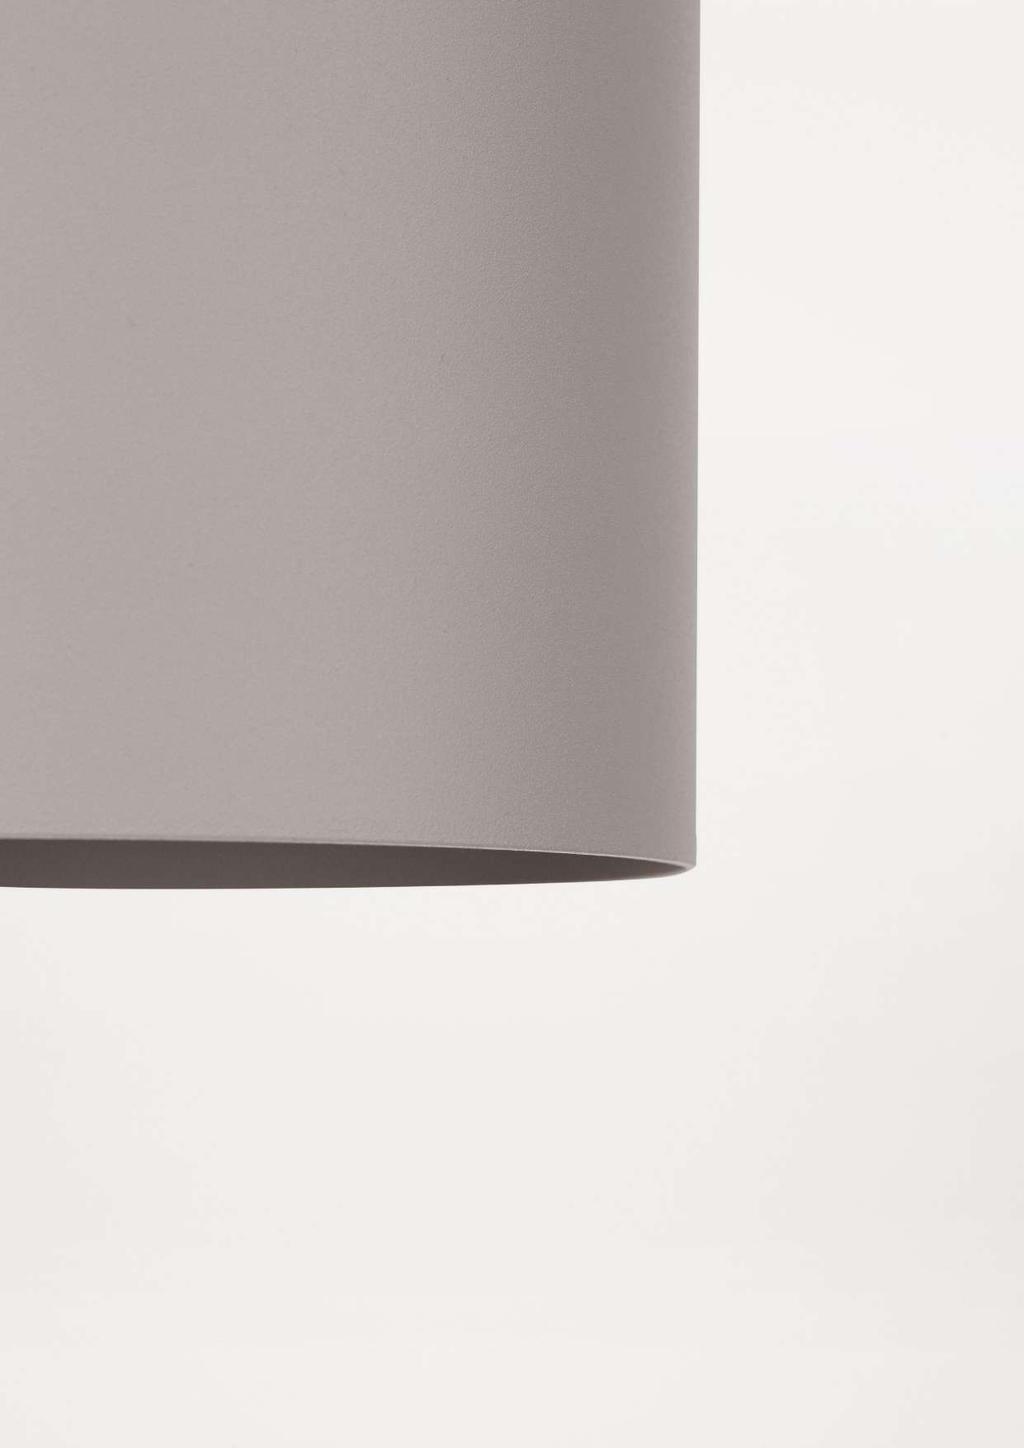 Ø240 Ø170 Ø120 270 210 150 GEOMETRIC SHADE CYLINDER Design Frama Year 2015 Typology Collection Origin Material Note Lampshade Permanent lighting Denmark Architects grey powder coated aluminum